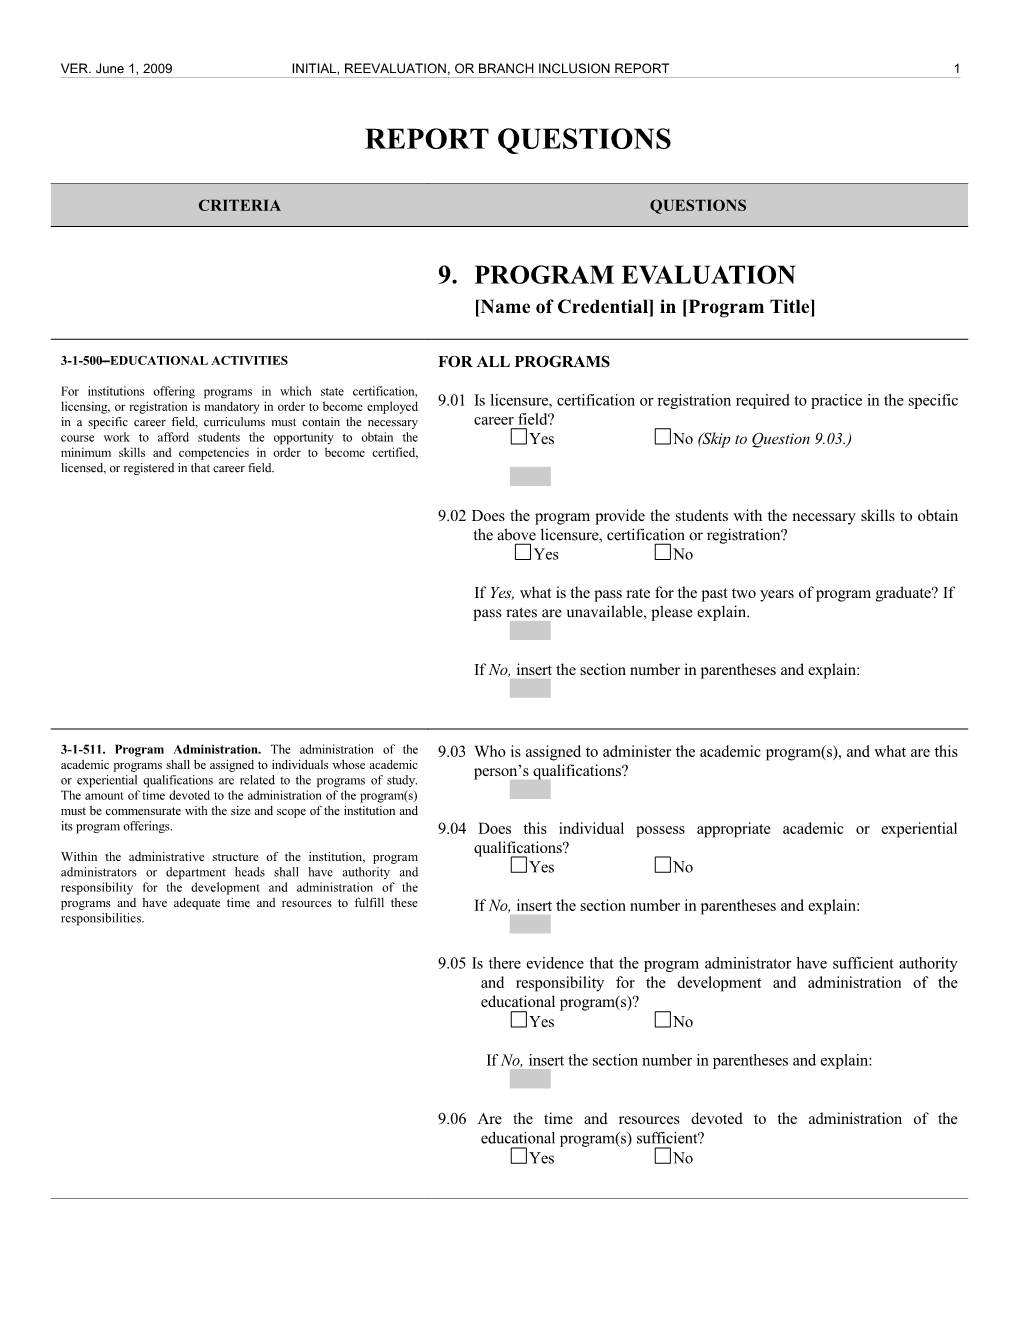 VER. June 1, 2009 INITIAL, REEVALUATION, OR BRANCH INCLUSION REPORT 1